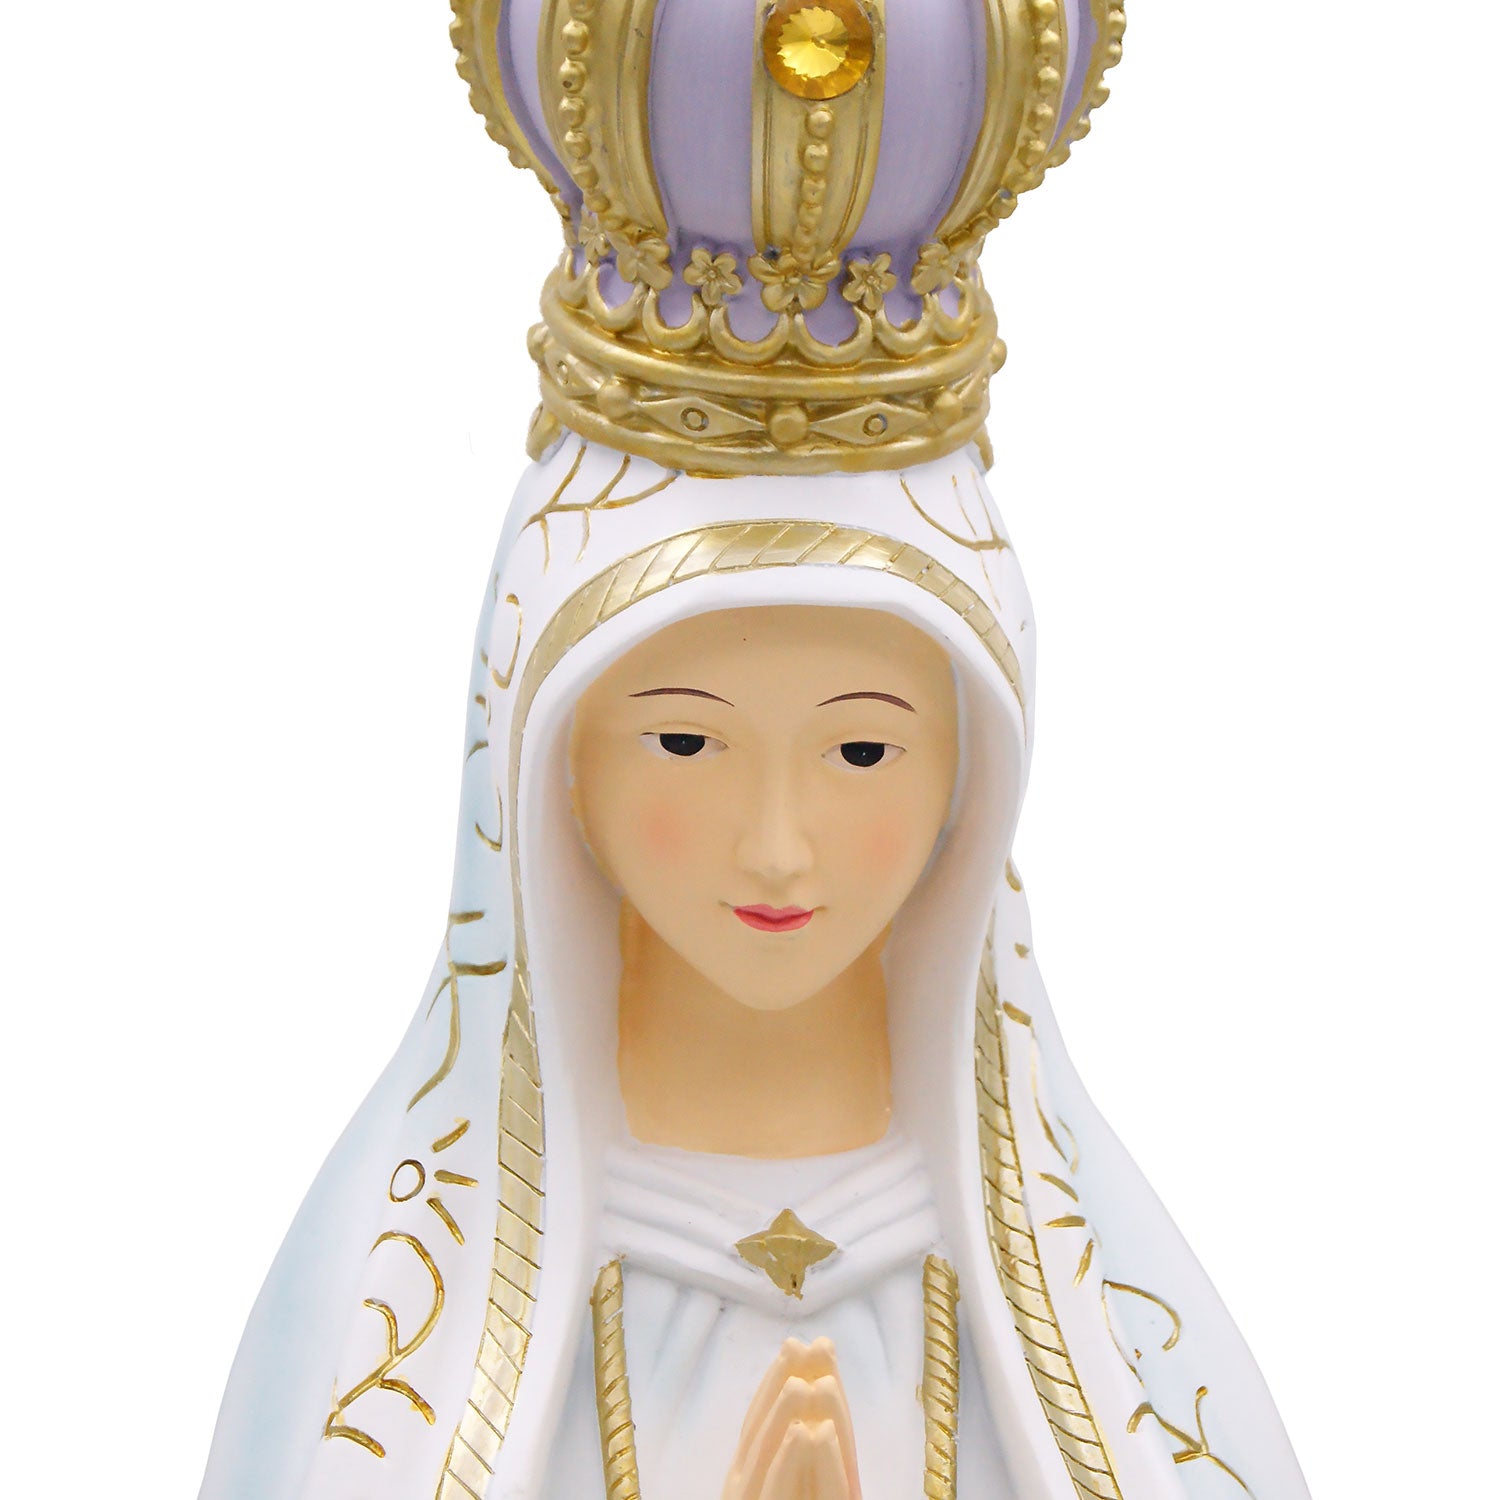 30 Inch Hand Painted Our Lady of Fatima Statue Made in Portugal